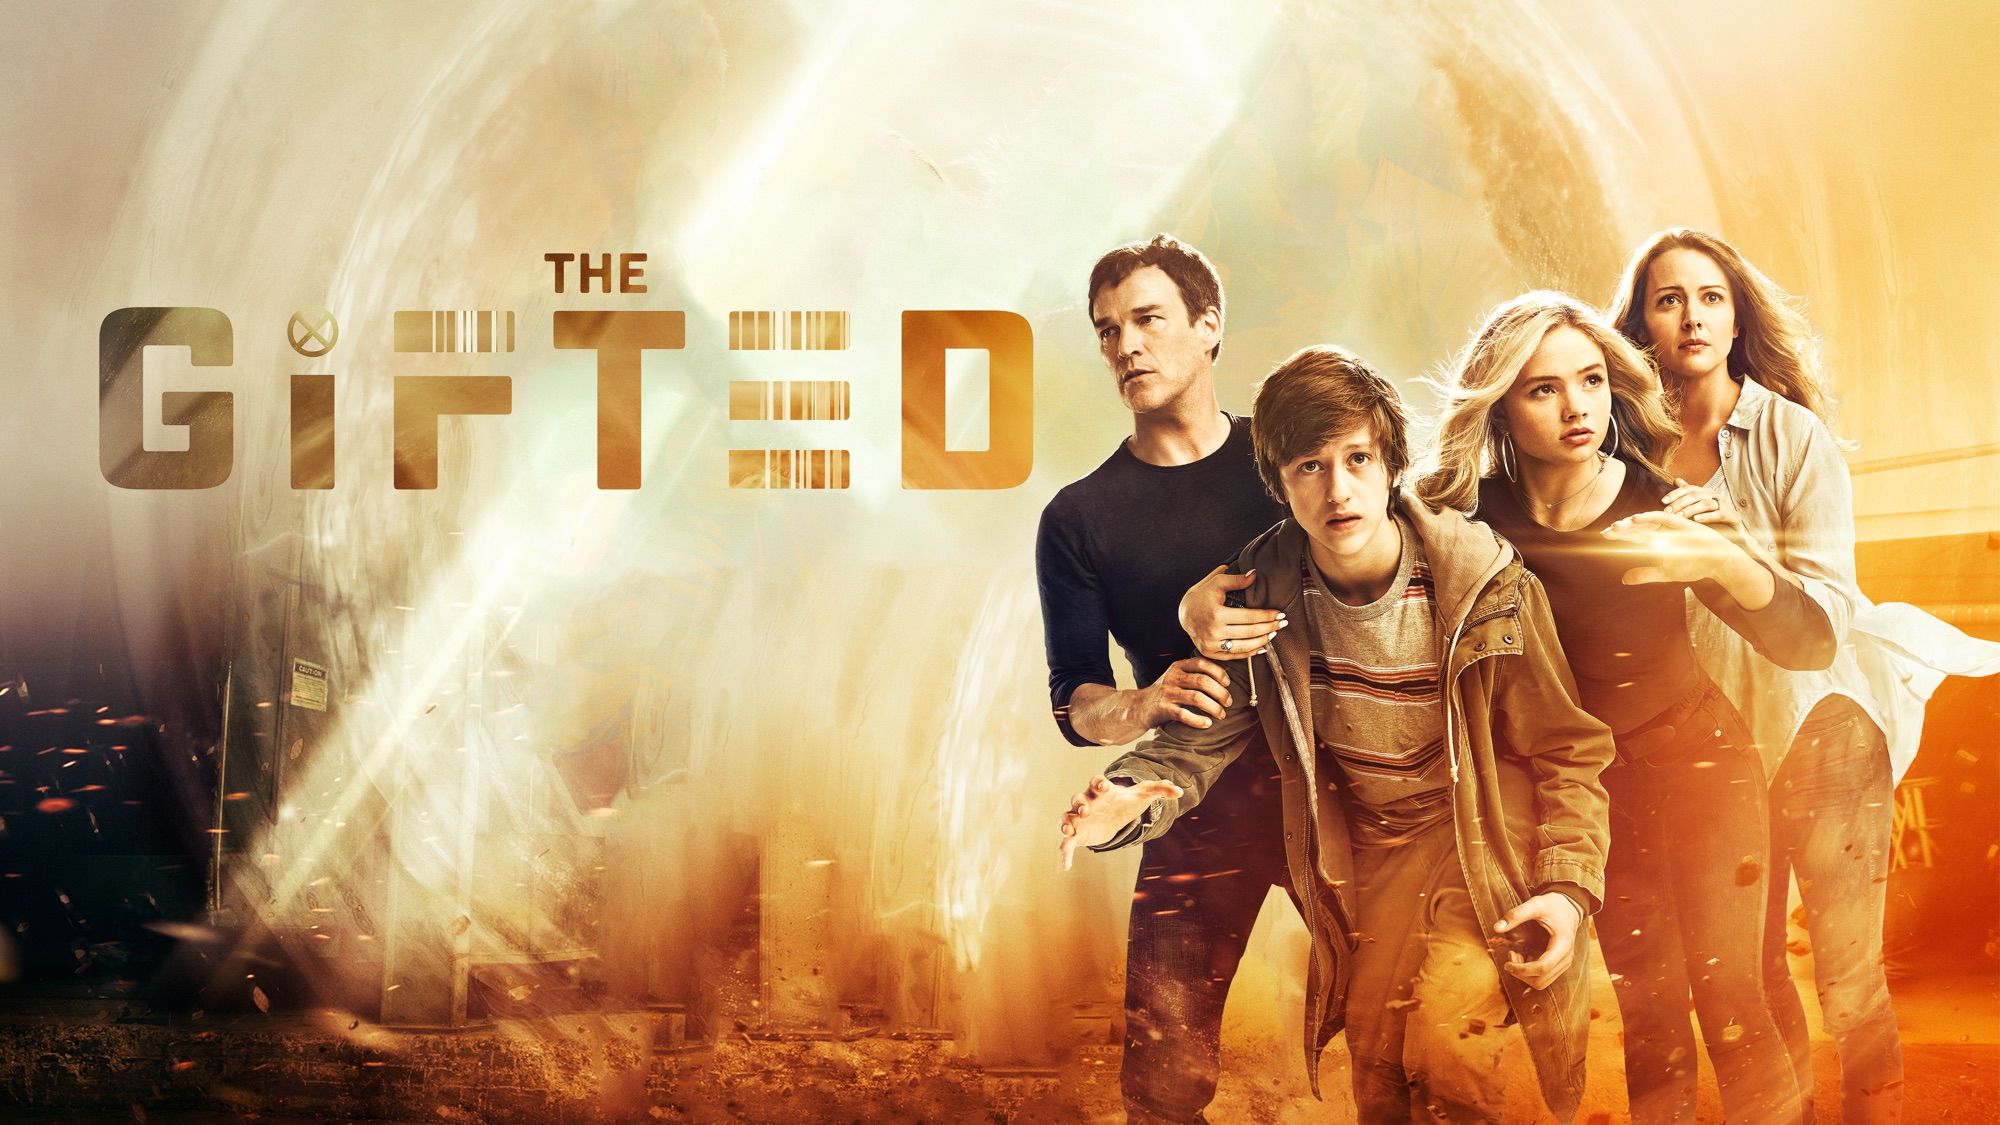 TV Show The Gifted HD Wallpaper | Background Image